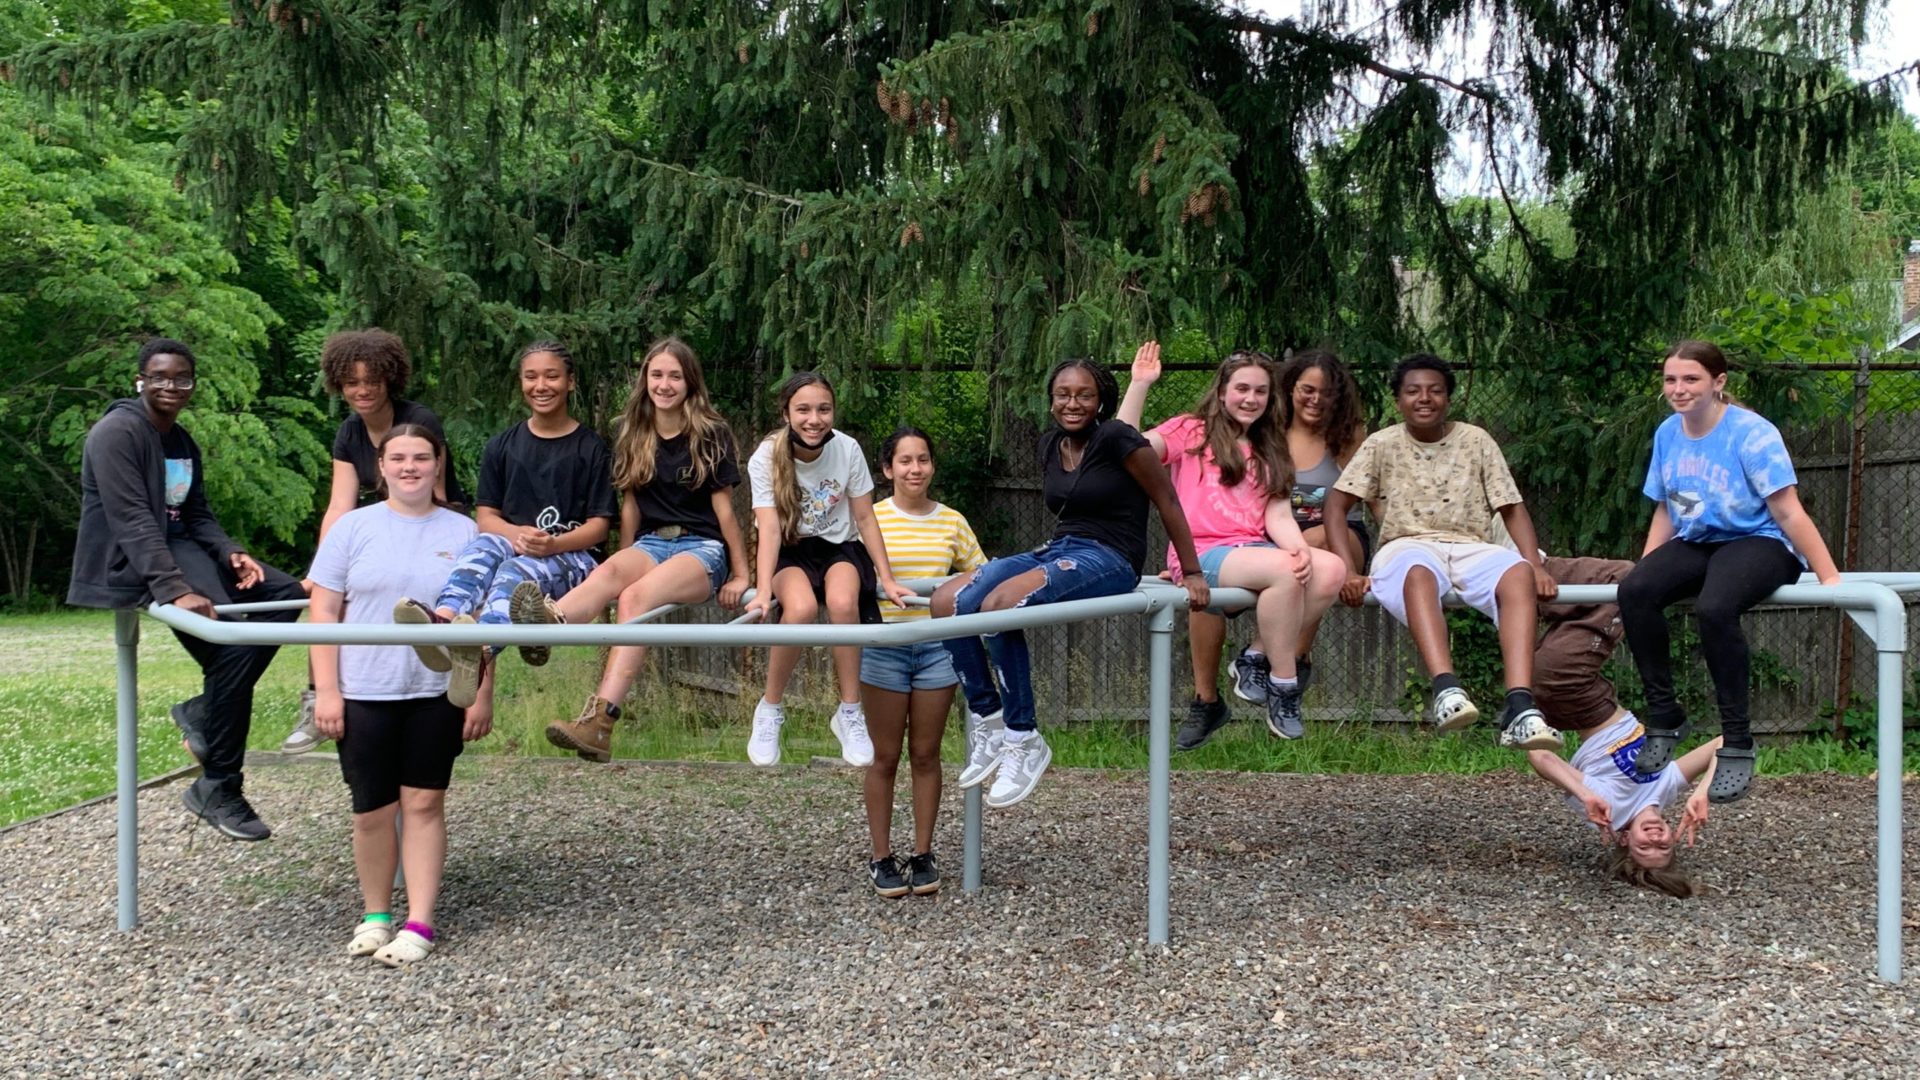 a group of junior high school students on a metal structure at an outodor park